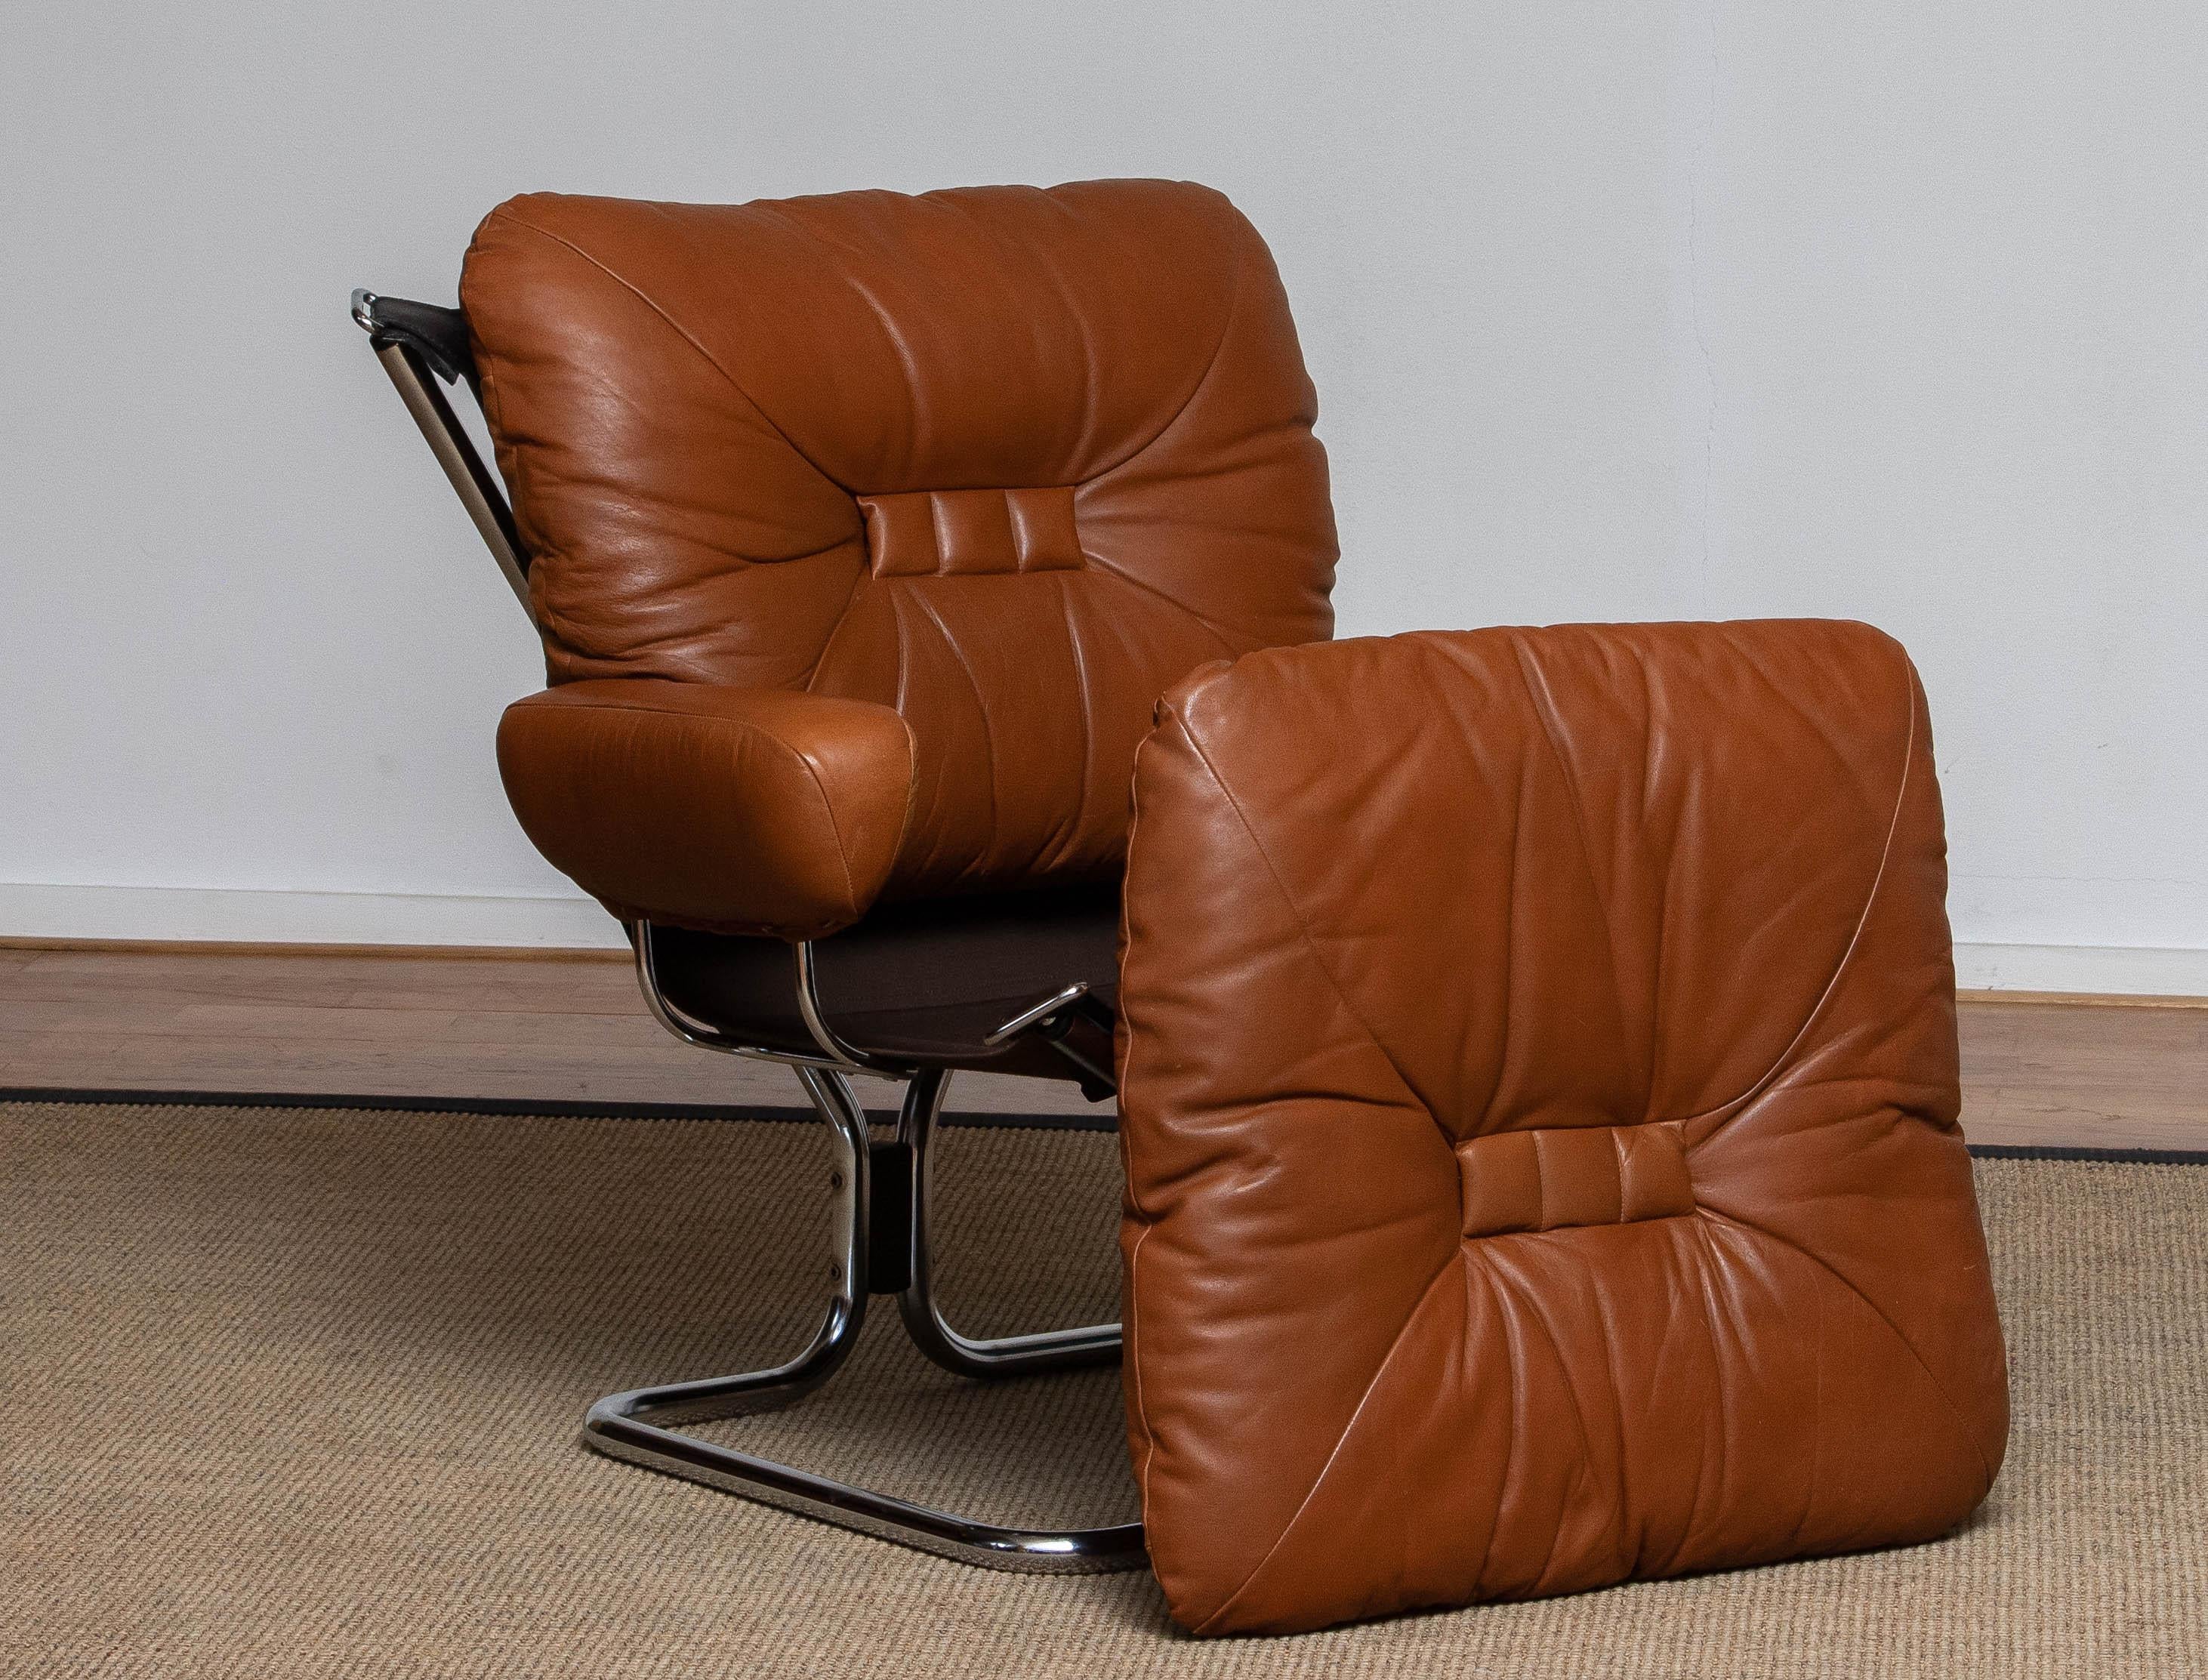 1970's Cognac Leather and Chrome Lounge Chair by Harald Relling for Westnofa 1